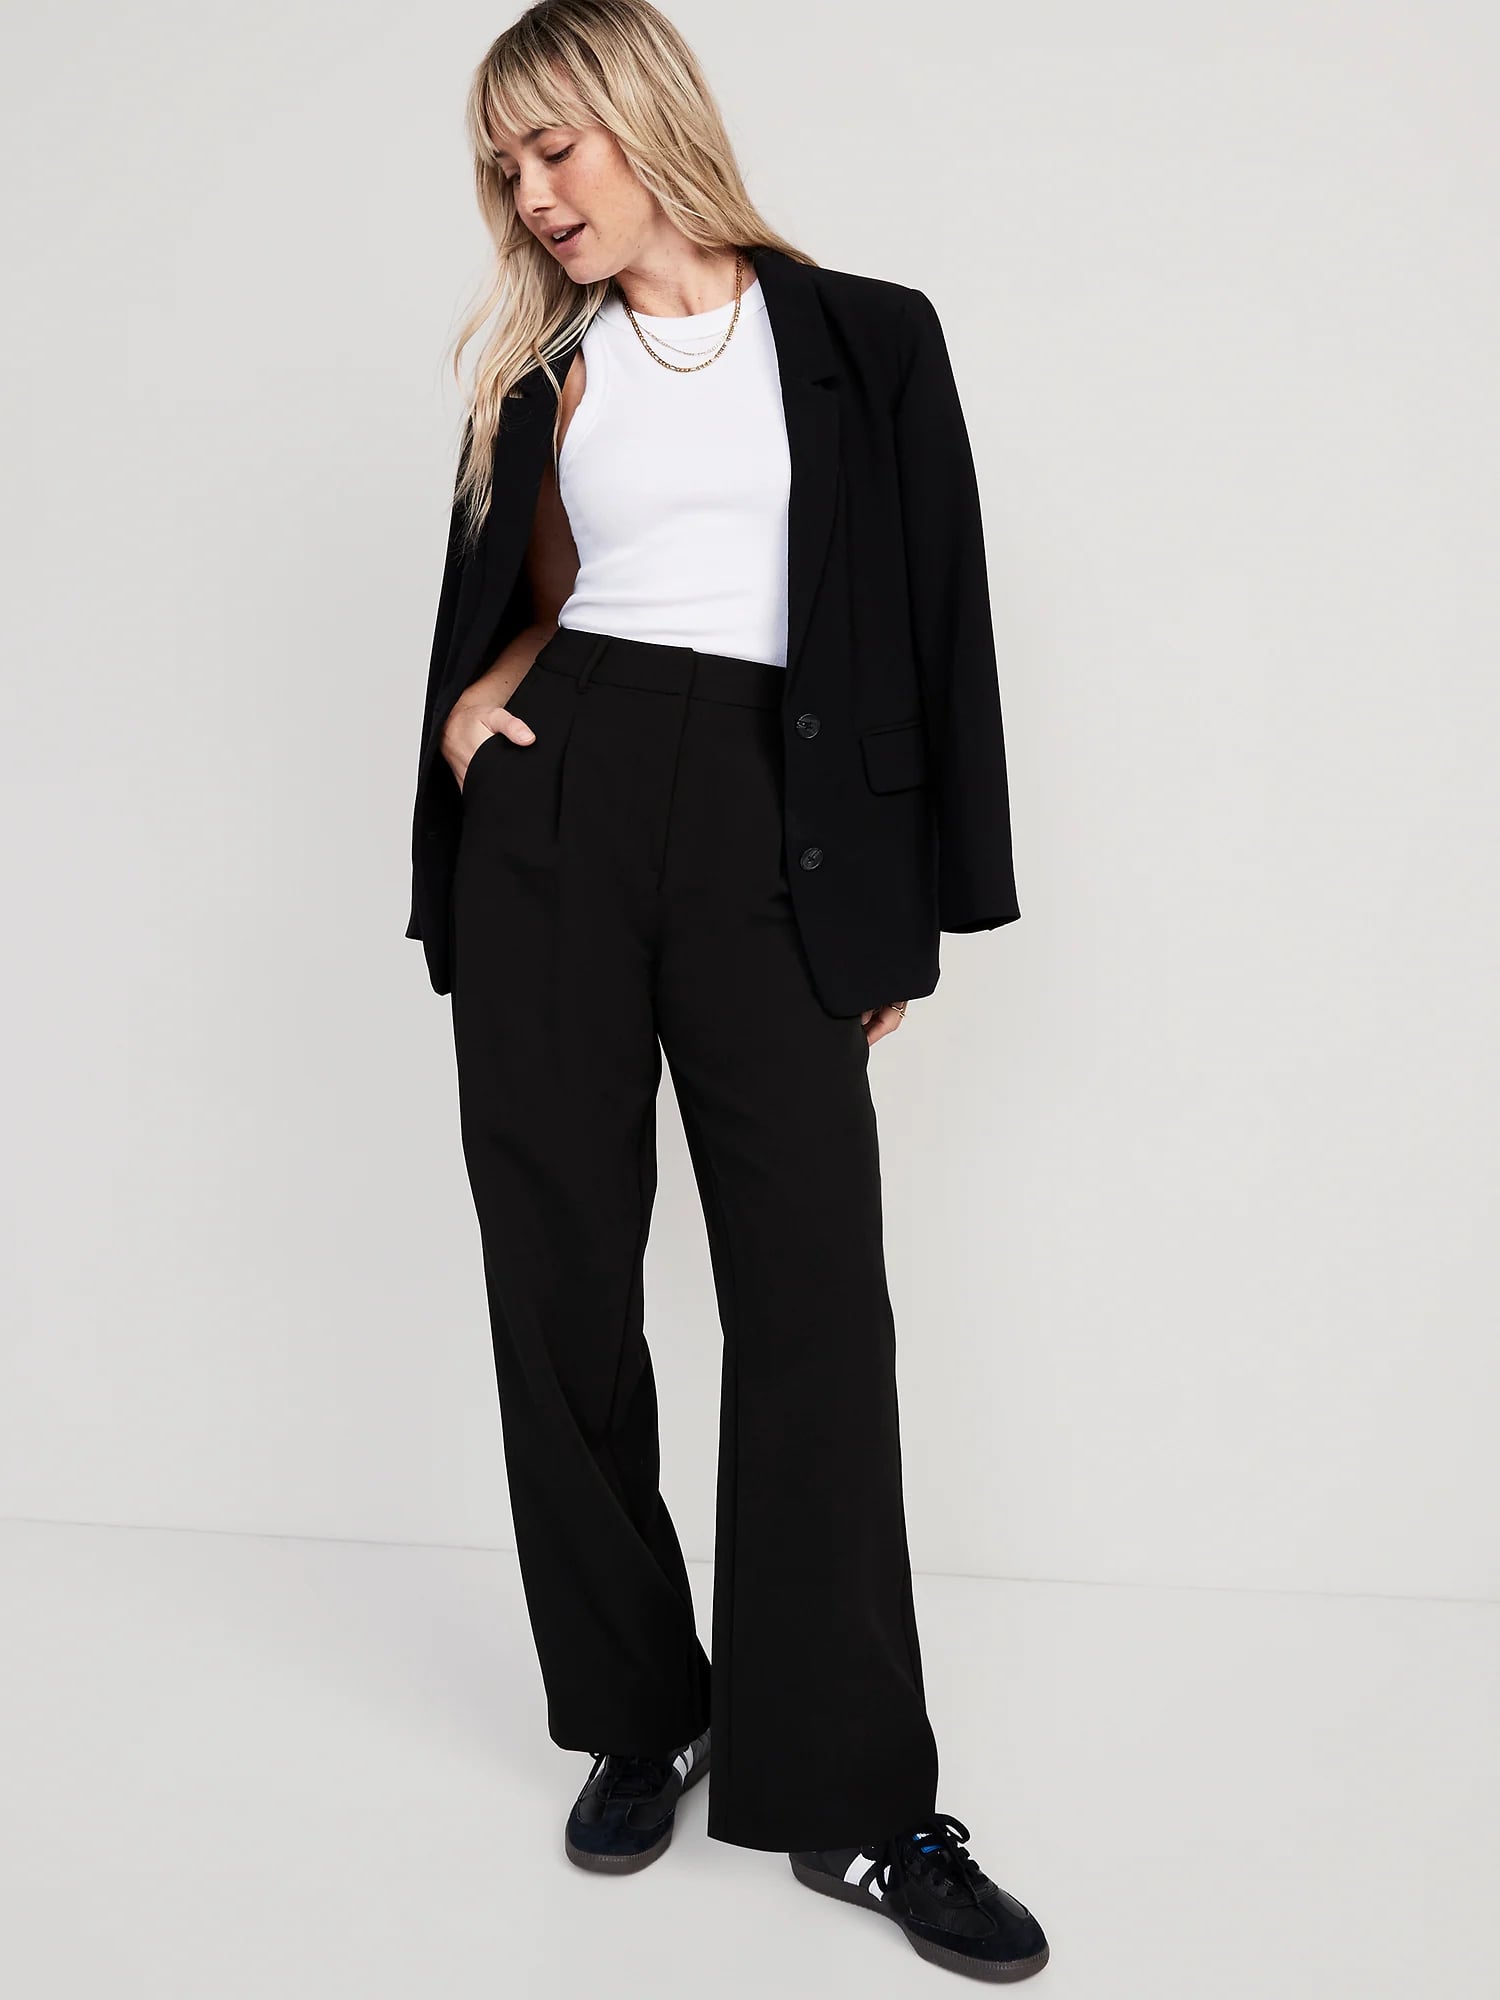 Nine-Thirty to Five: Basics. Pants. Word.  Navy pants outfit women,  Business casual outfits for work, Dress pants outfits